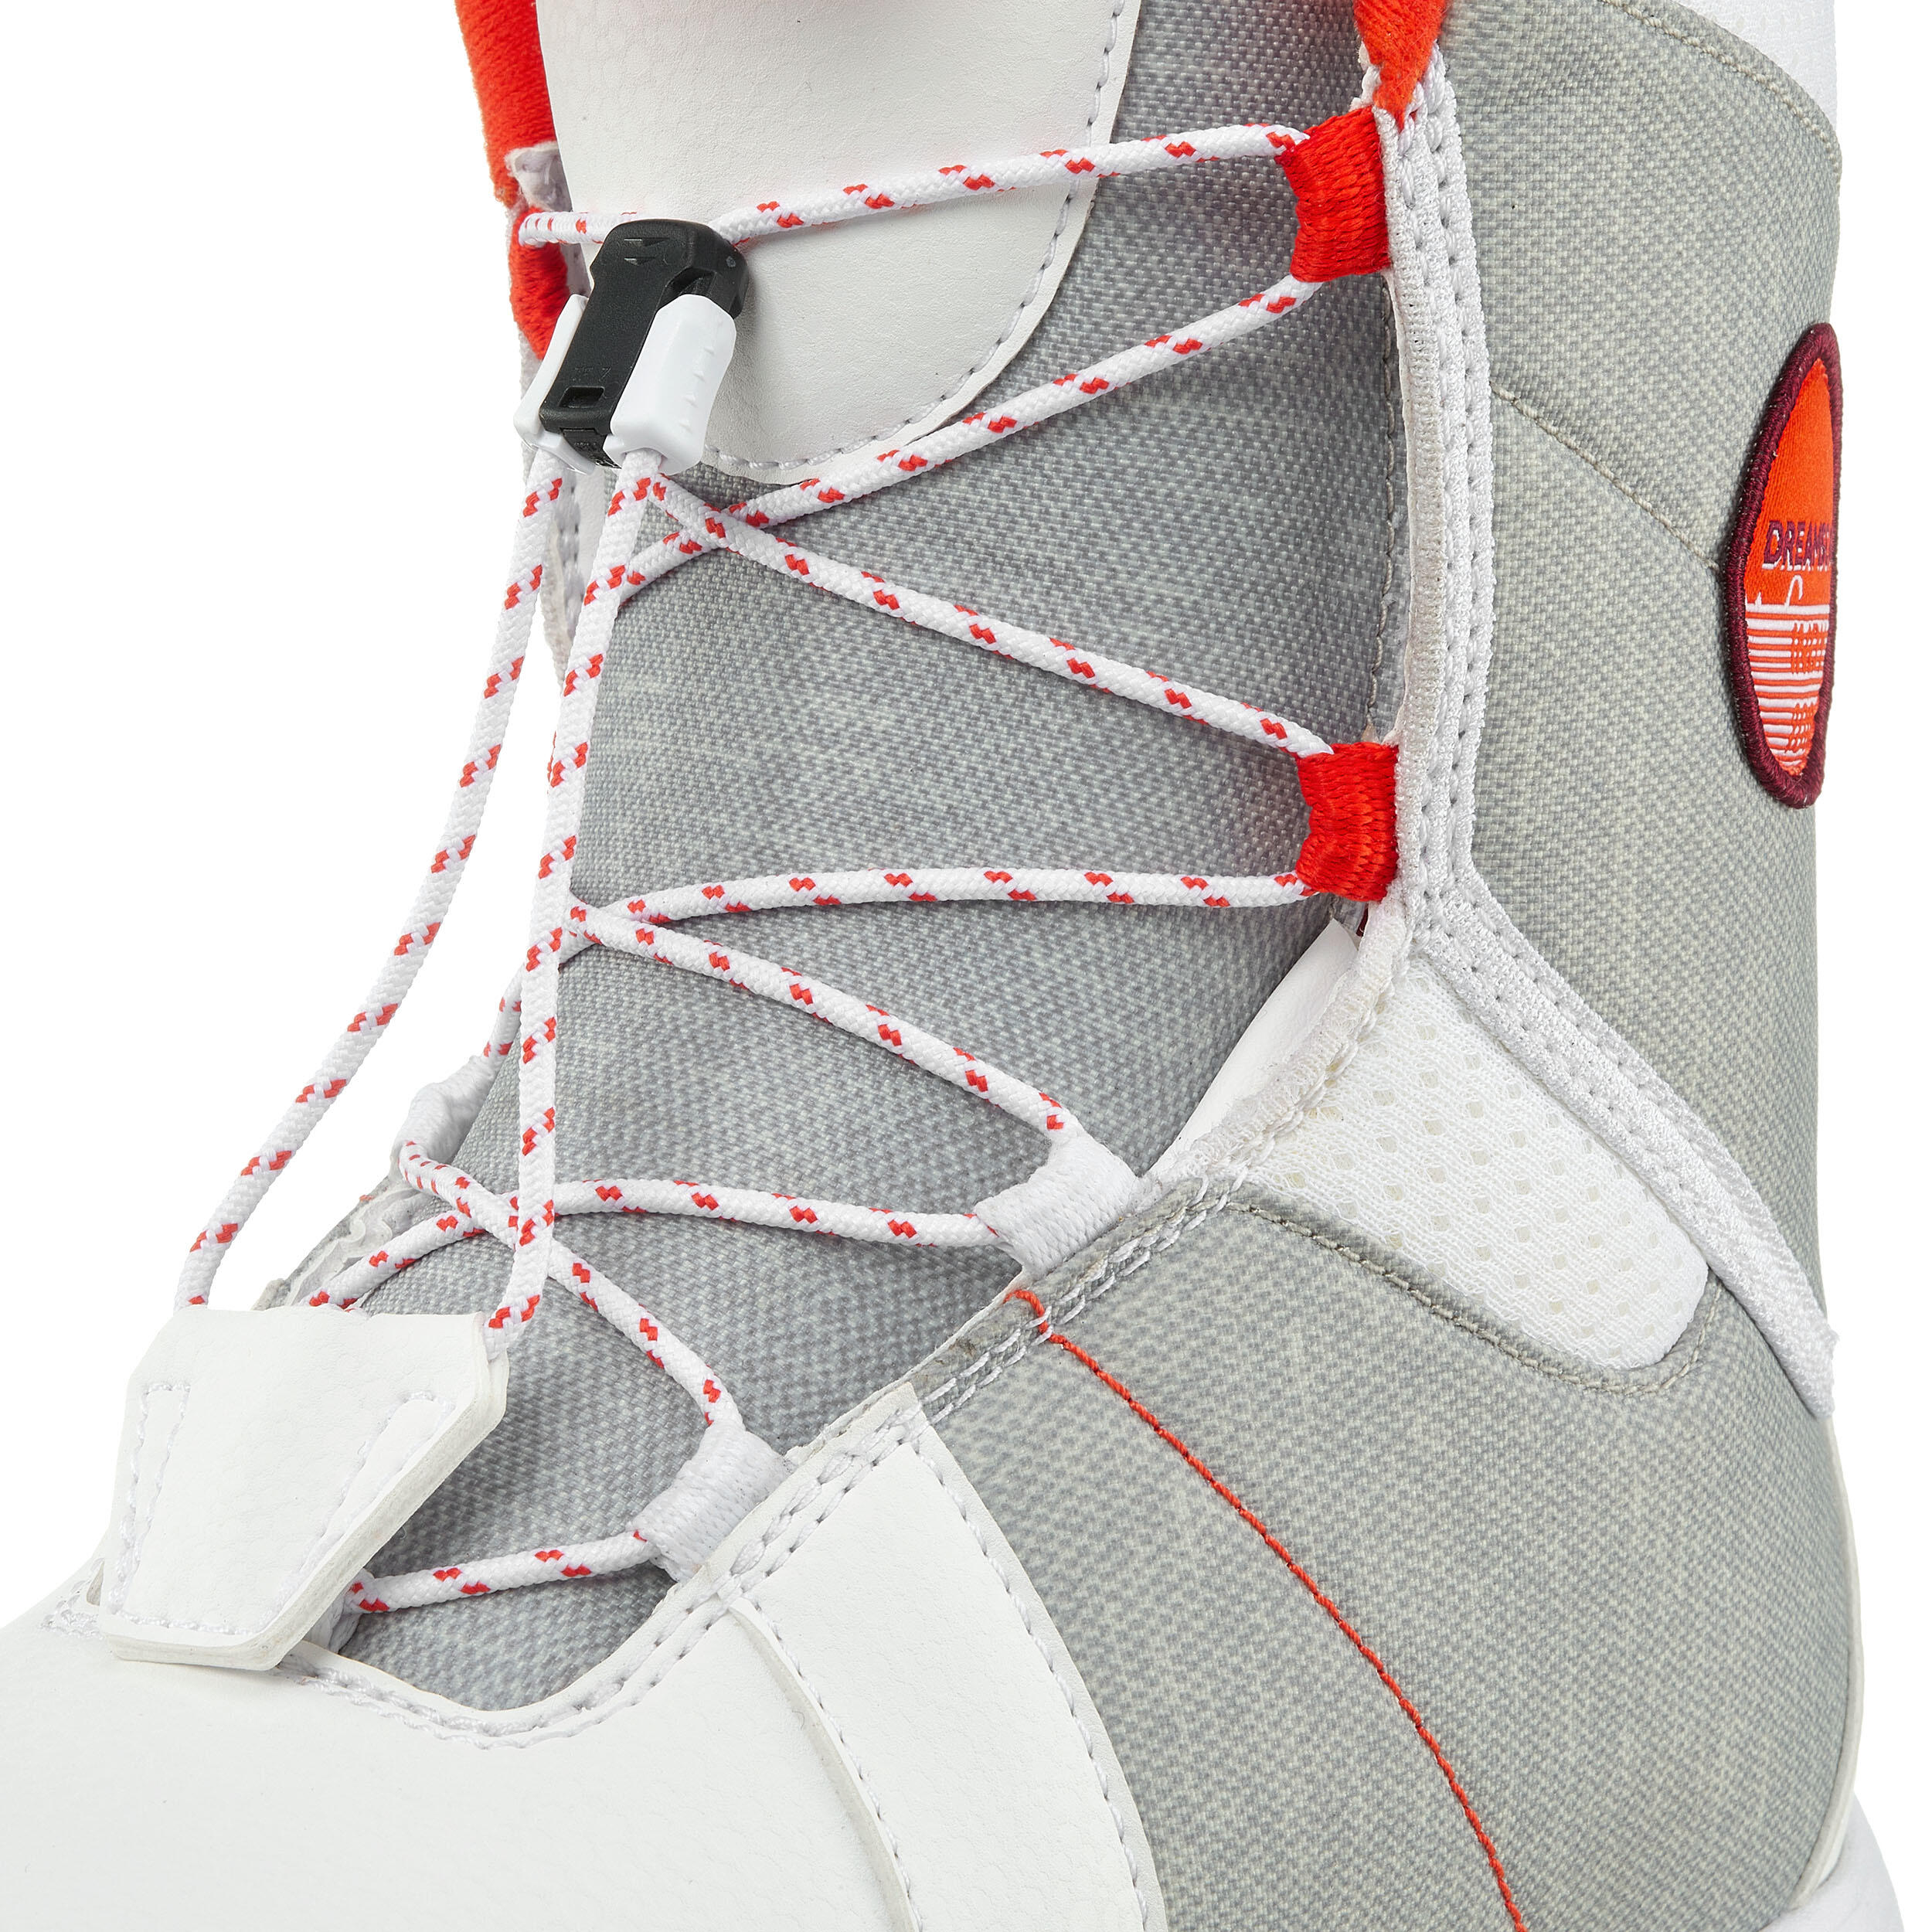 Kids’ Quick Fastening Snowboard Boots - Indy 100 - XS 7/8